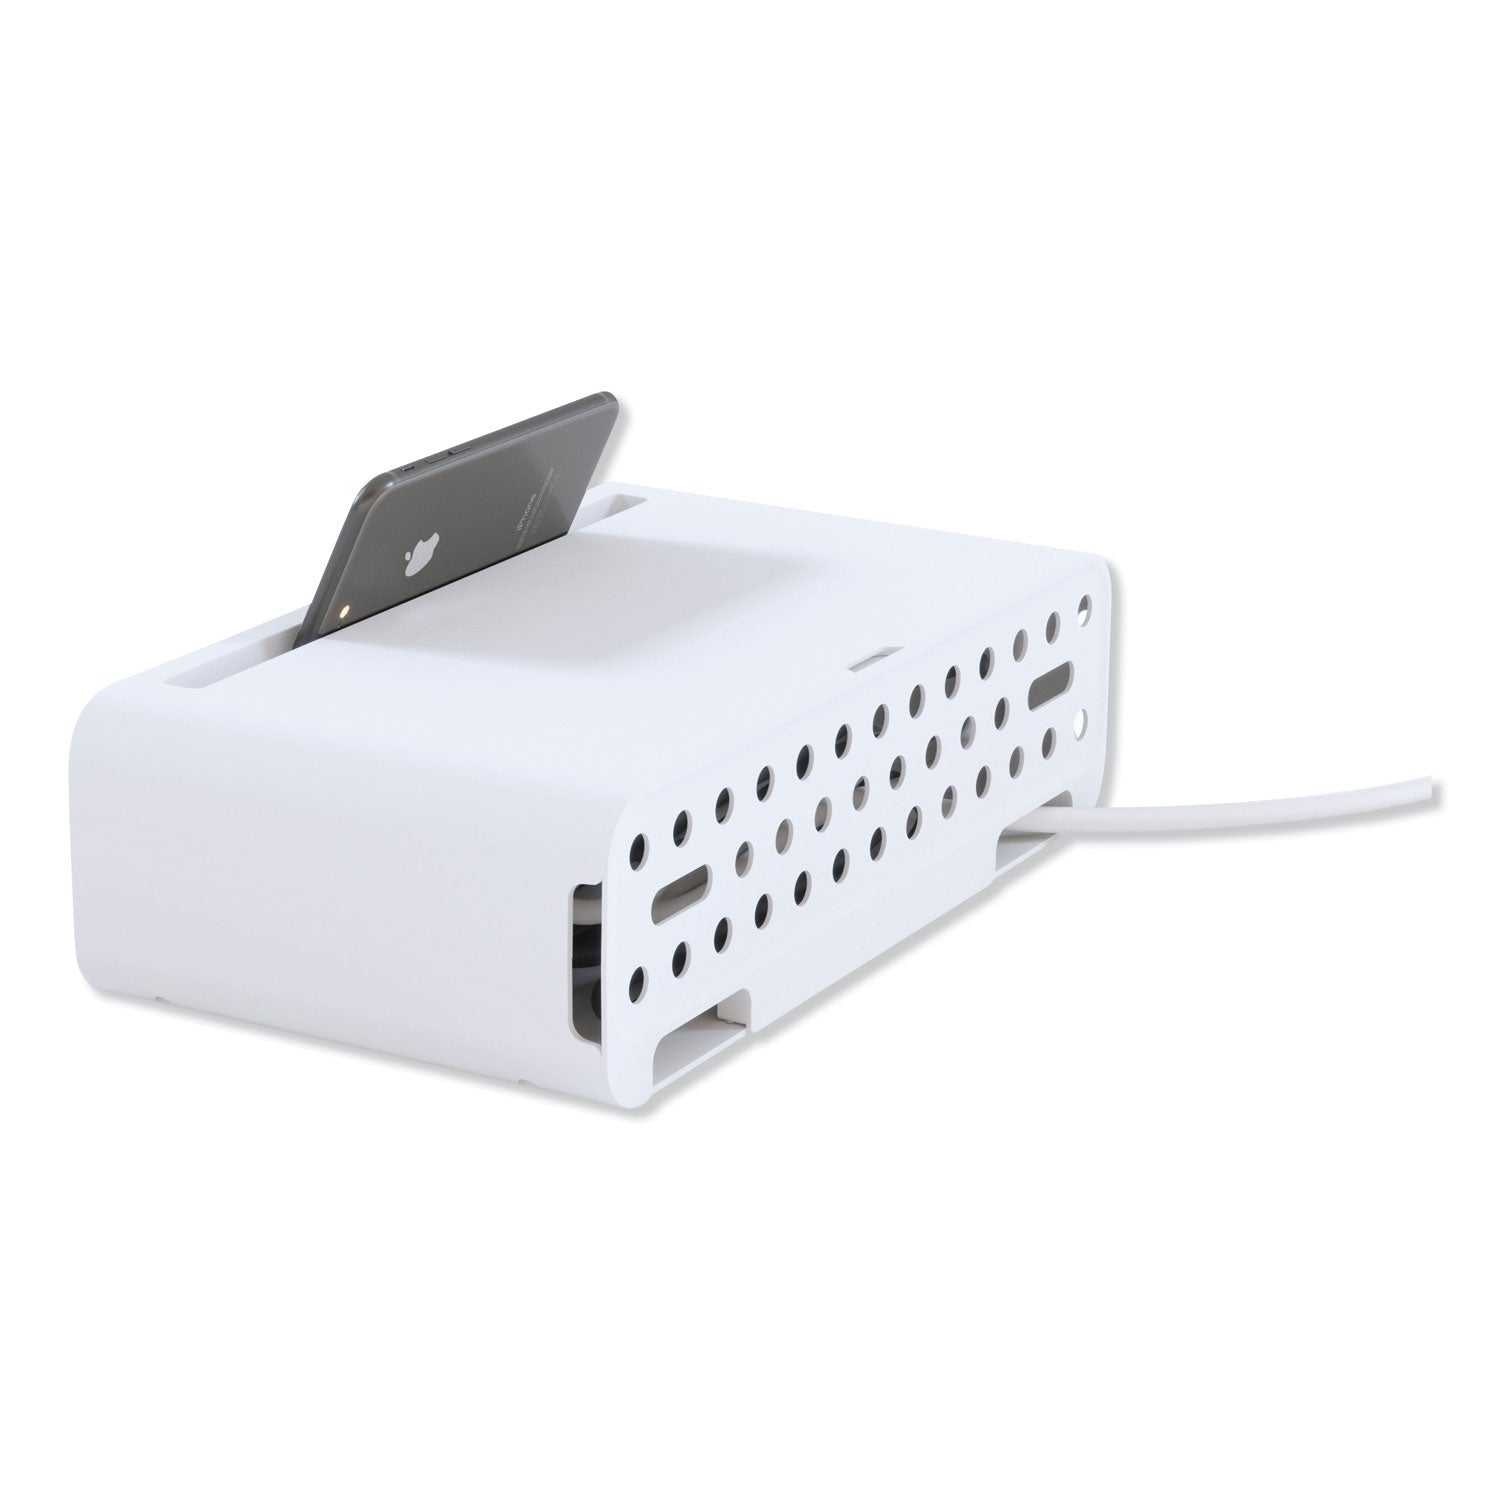 cable-management-power-hub-and-stand-with-usb-charging-ports-5-outlets-3-usb-65-ft-cord-white_ktkcm1100 - 2